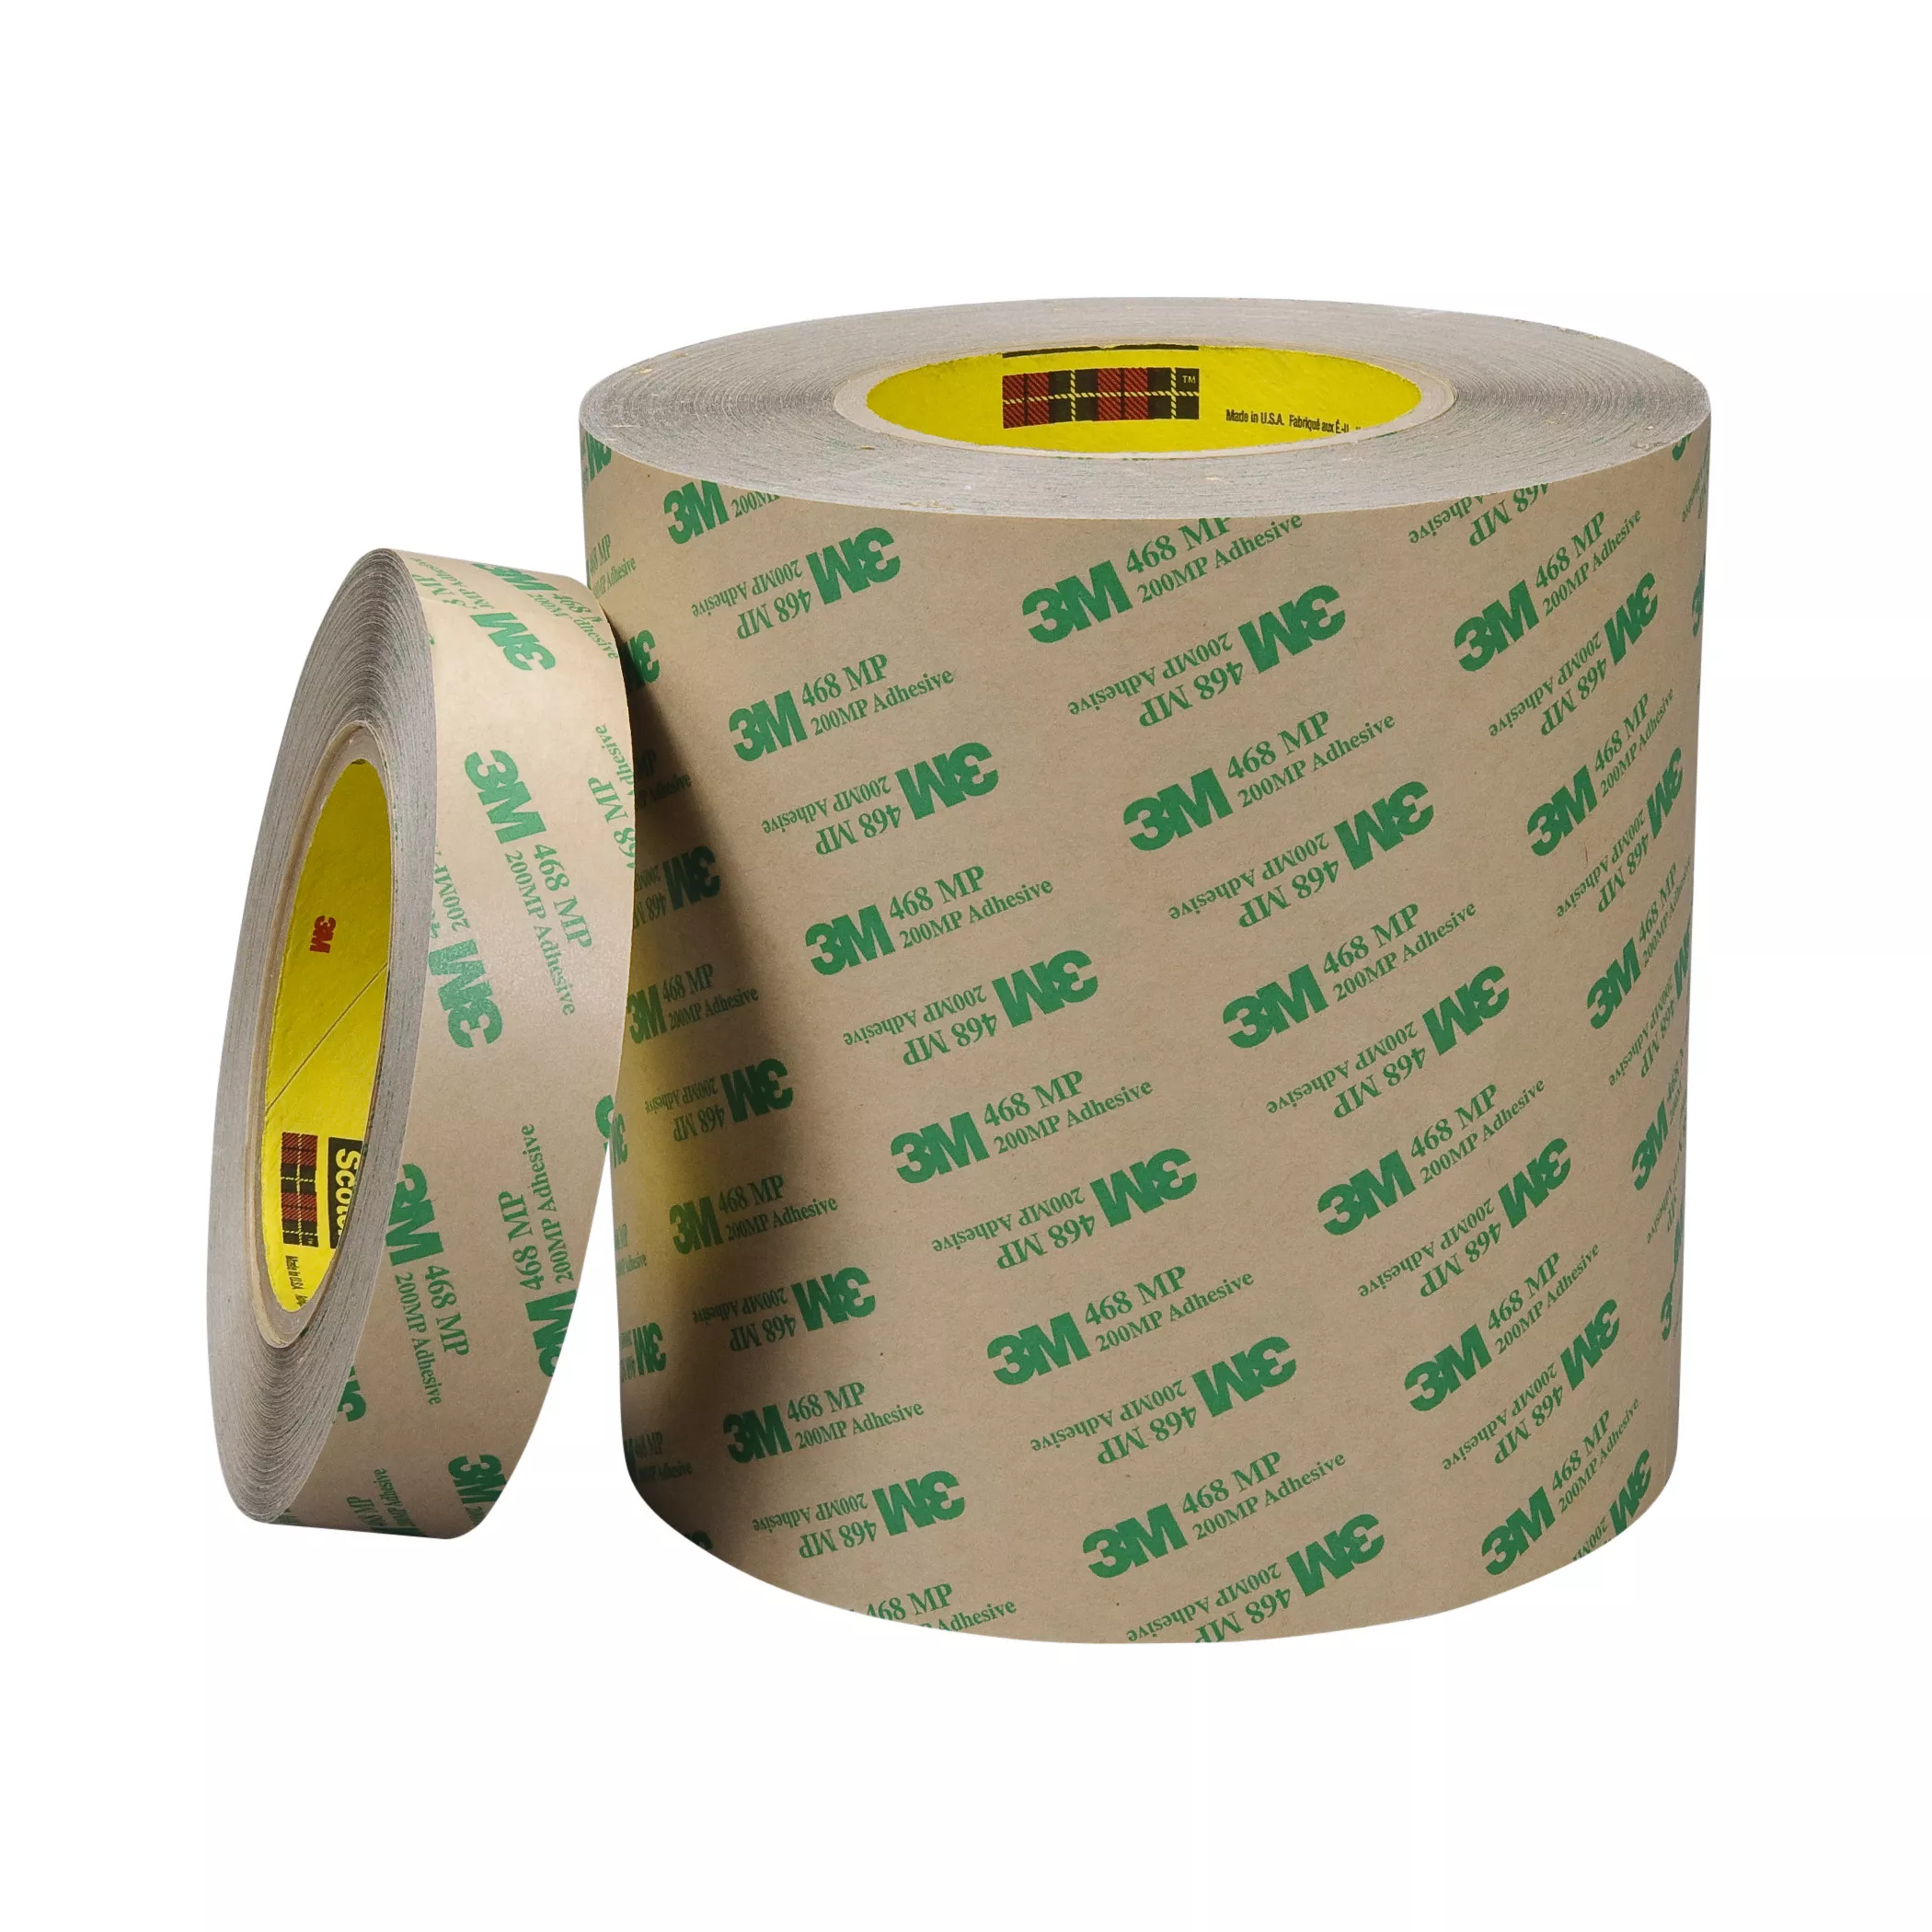 3M™ Adhesive Transfer Tape 468MP, Clear, 48 in x 180 yd, 5 mil, 1
Roll/Case